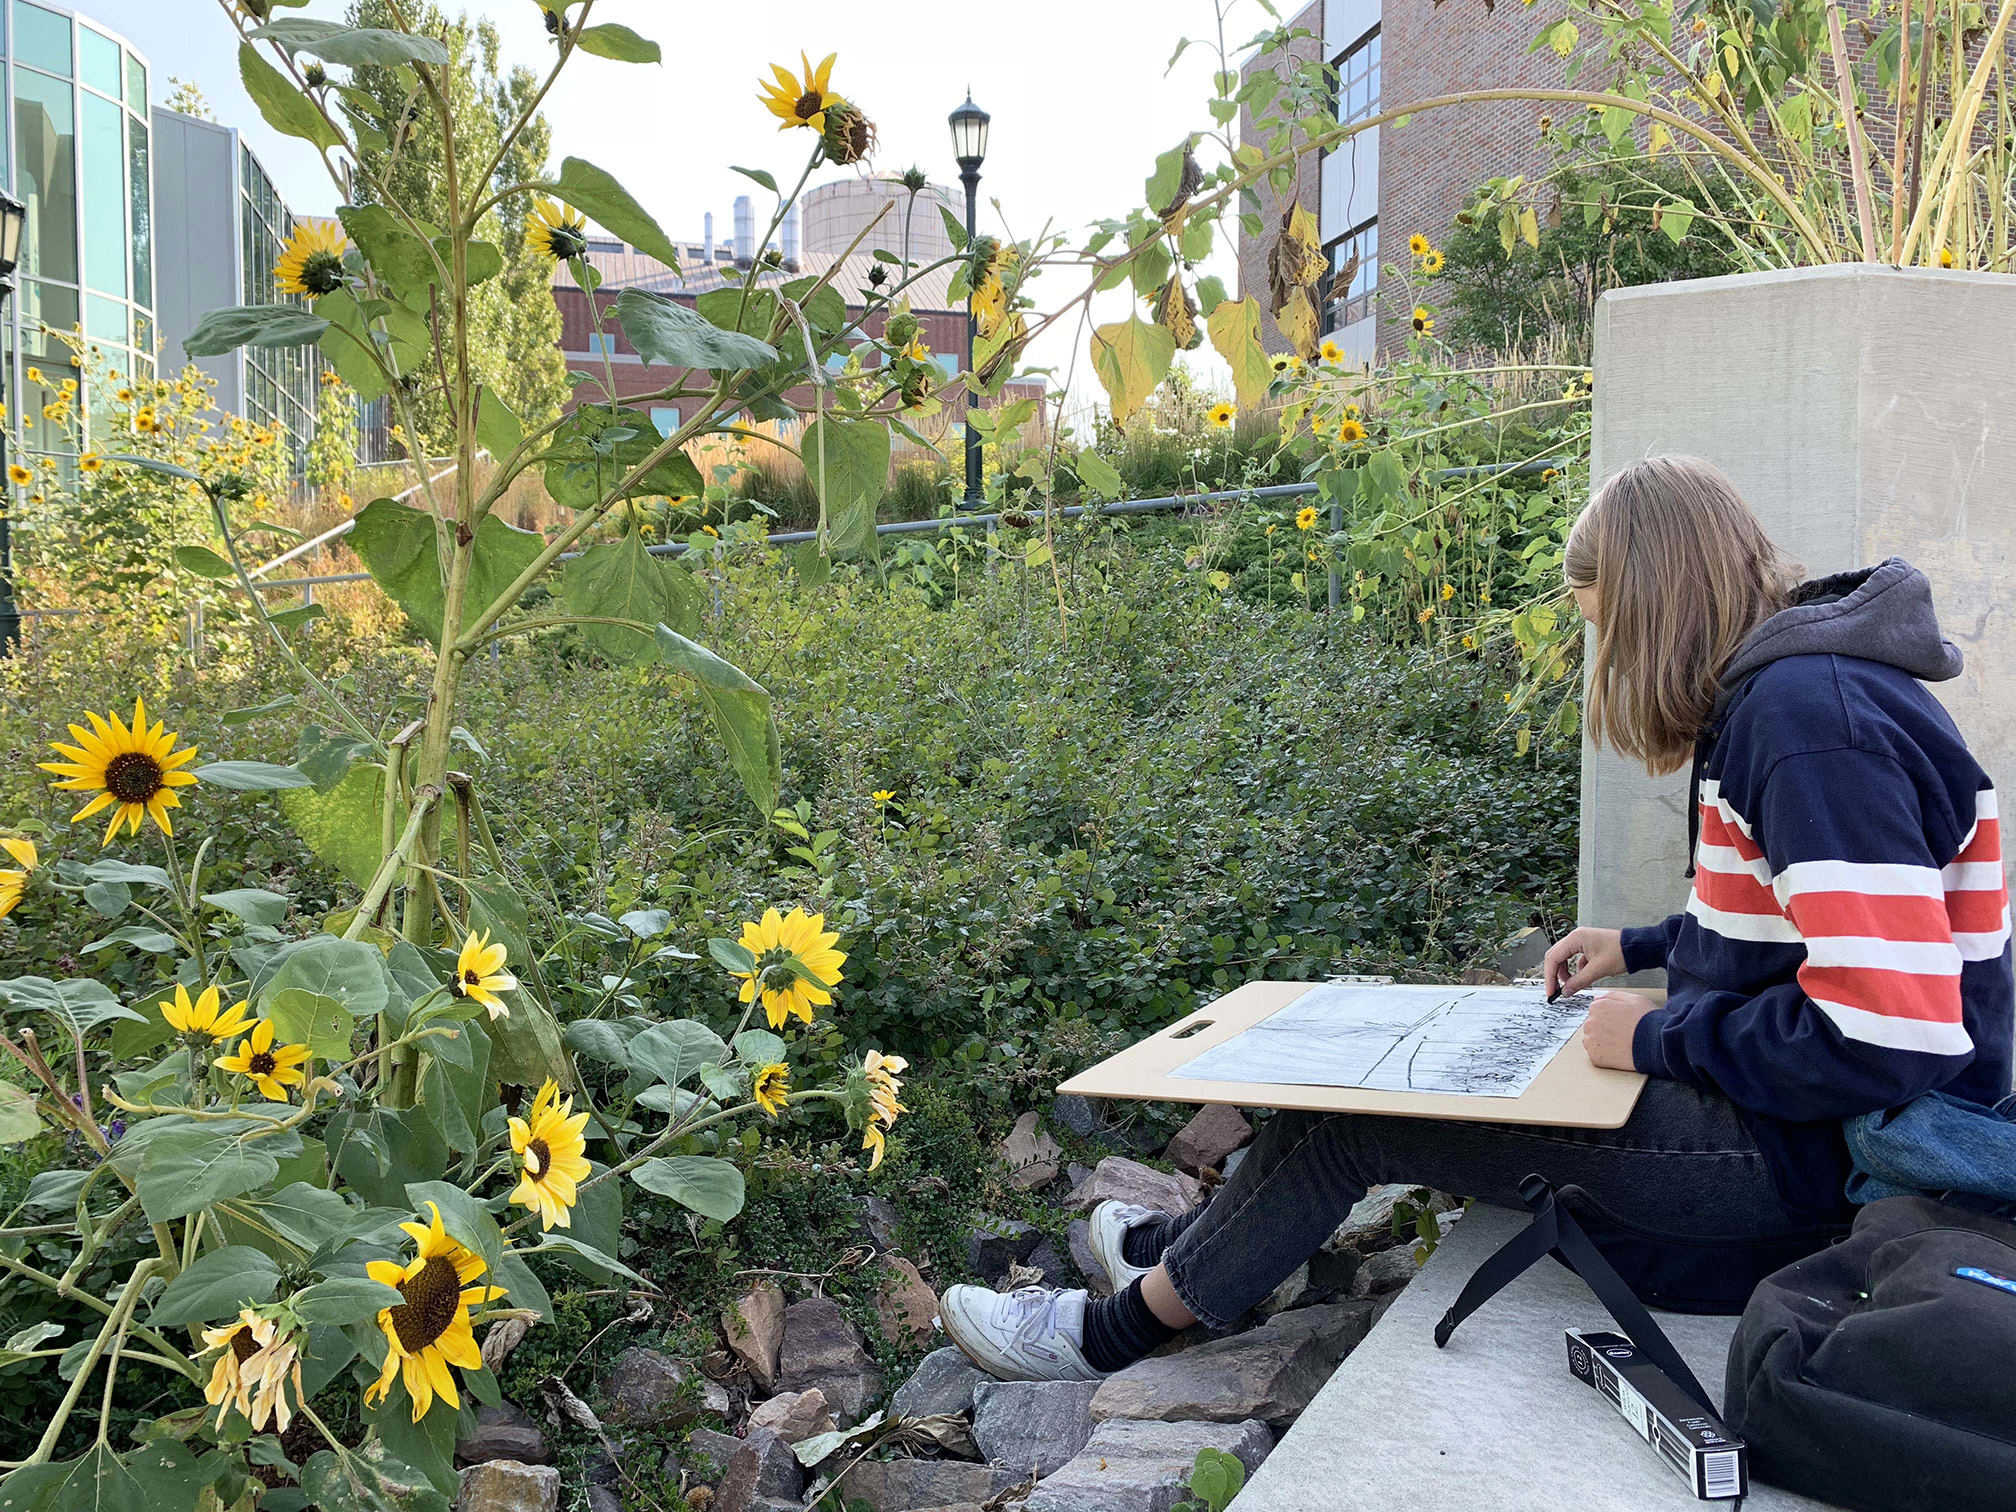 Surrounded by tall yellow sunflowers, a young woman wearing a blue sweatshirt with red and white stripes is sitting working on a drawing of the plants